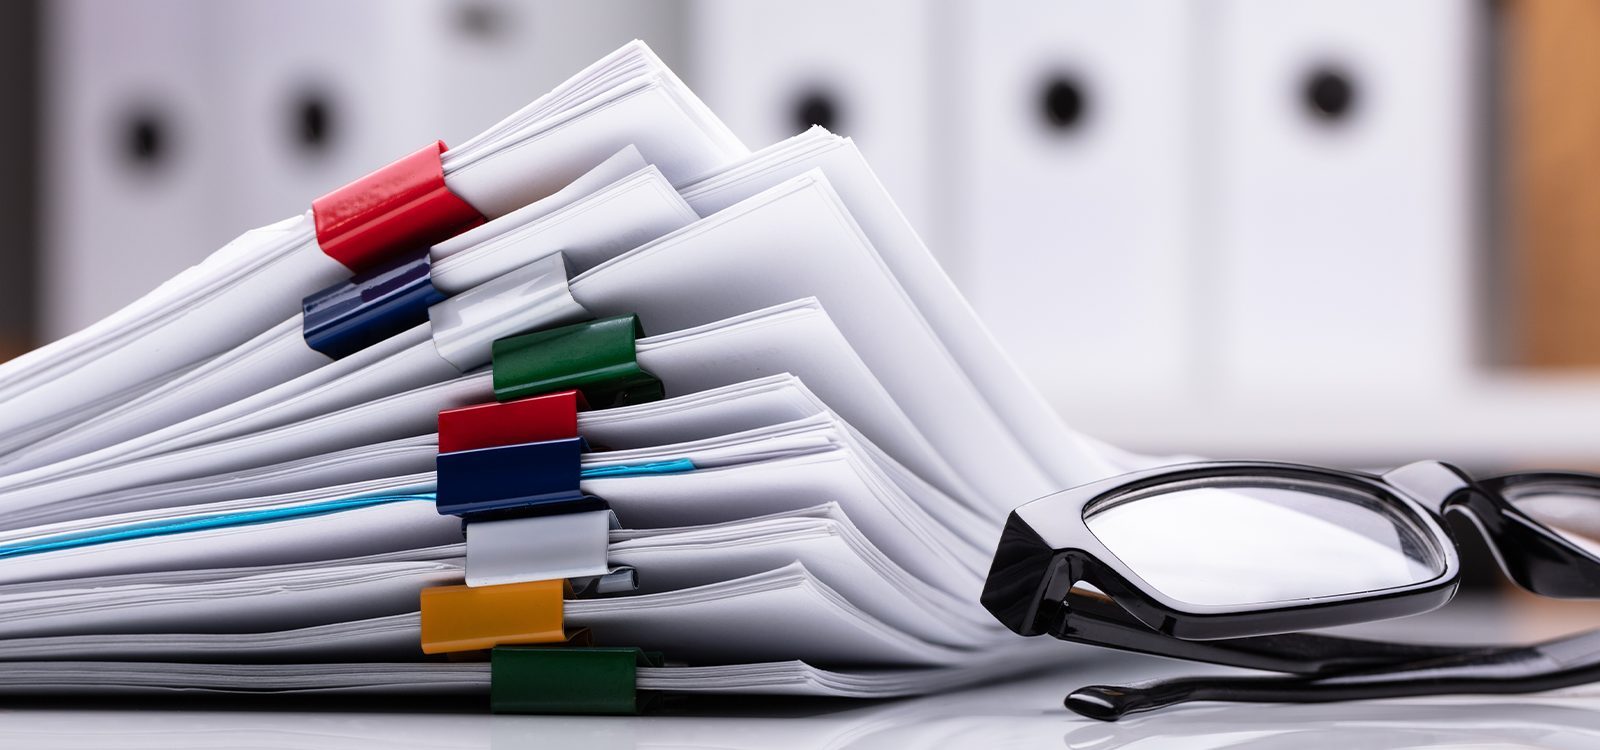 Annual attestation update and what is in the pipeline for Professional Practice Documents